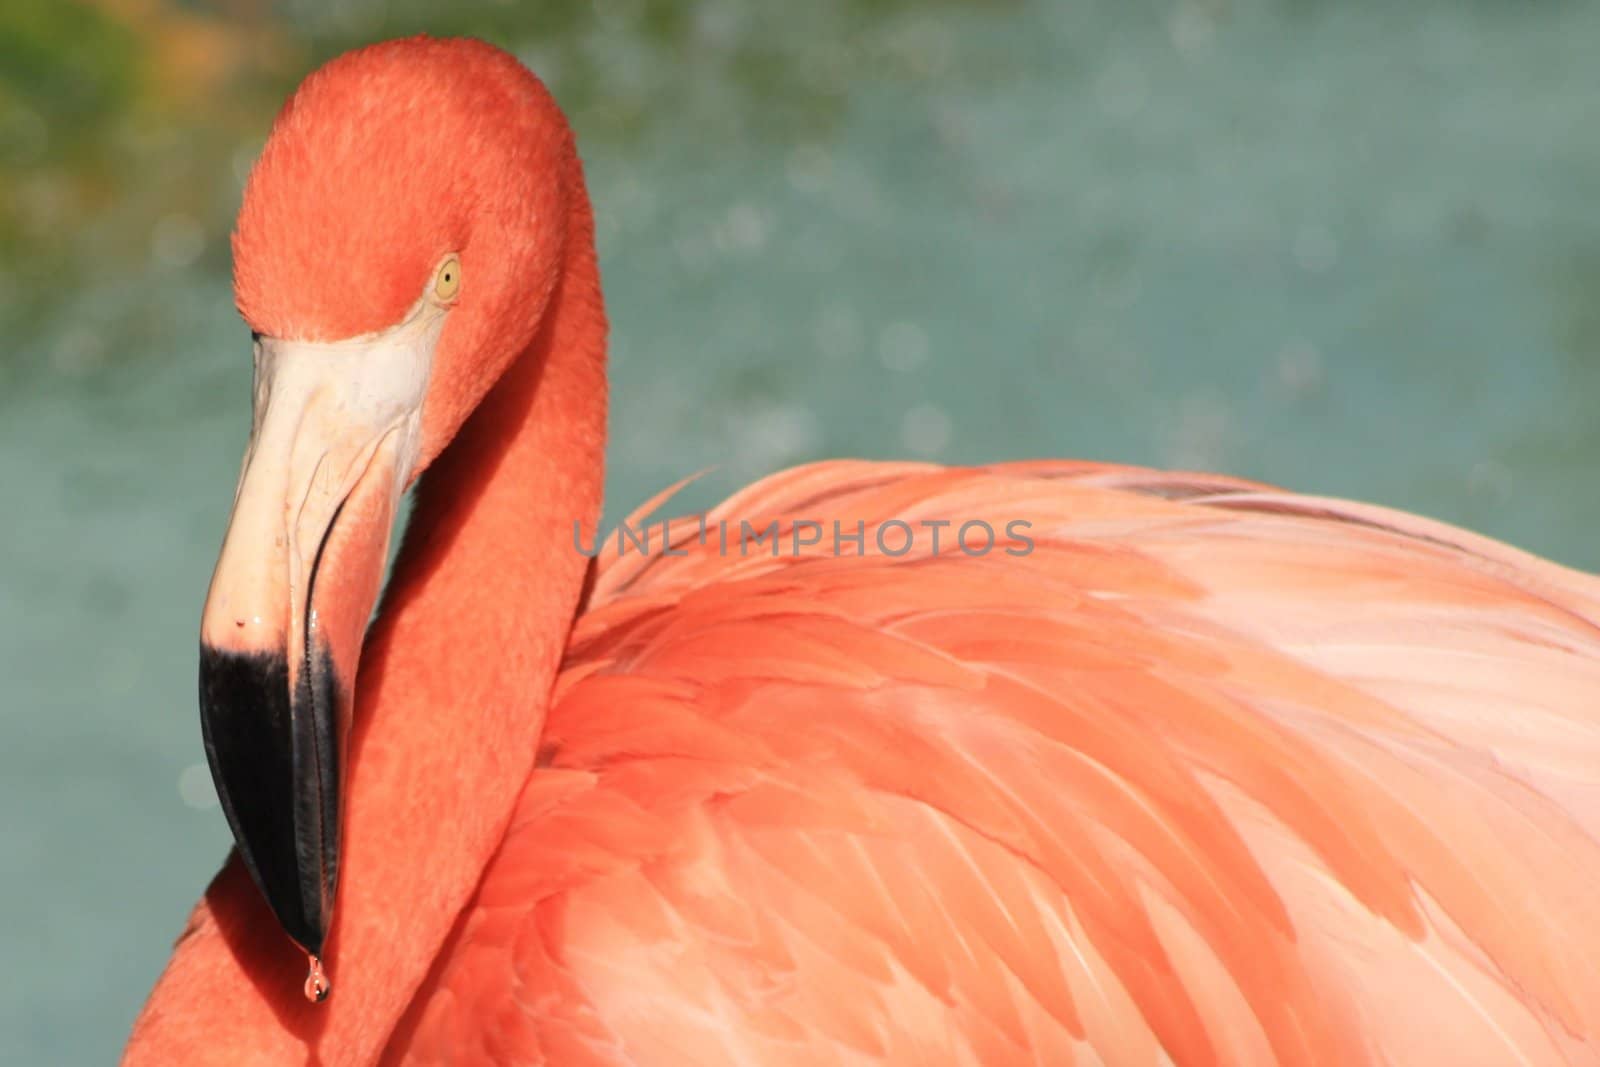 Upper body of flamingo with water dripping from the beak